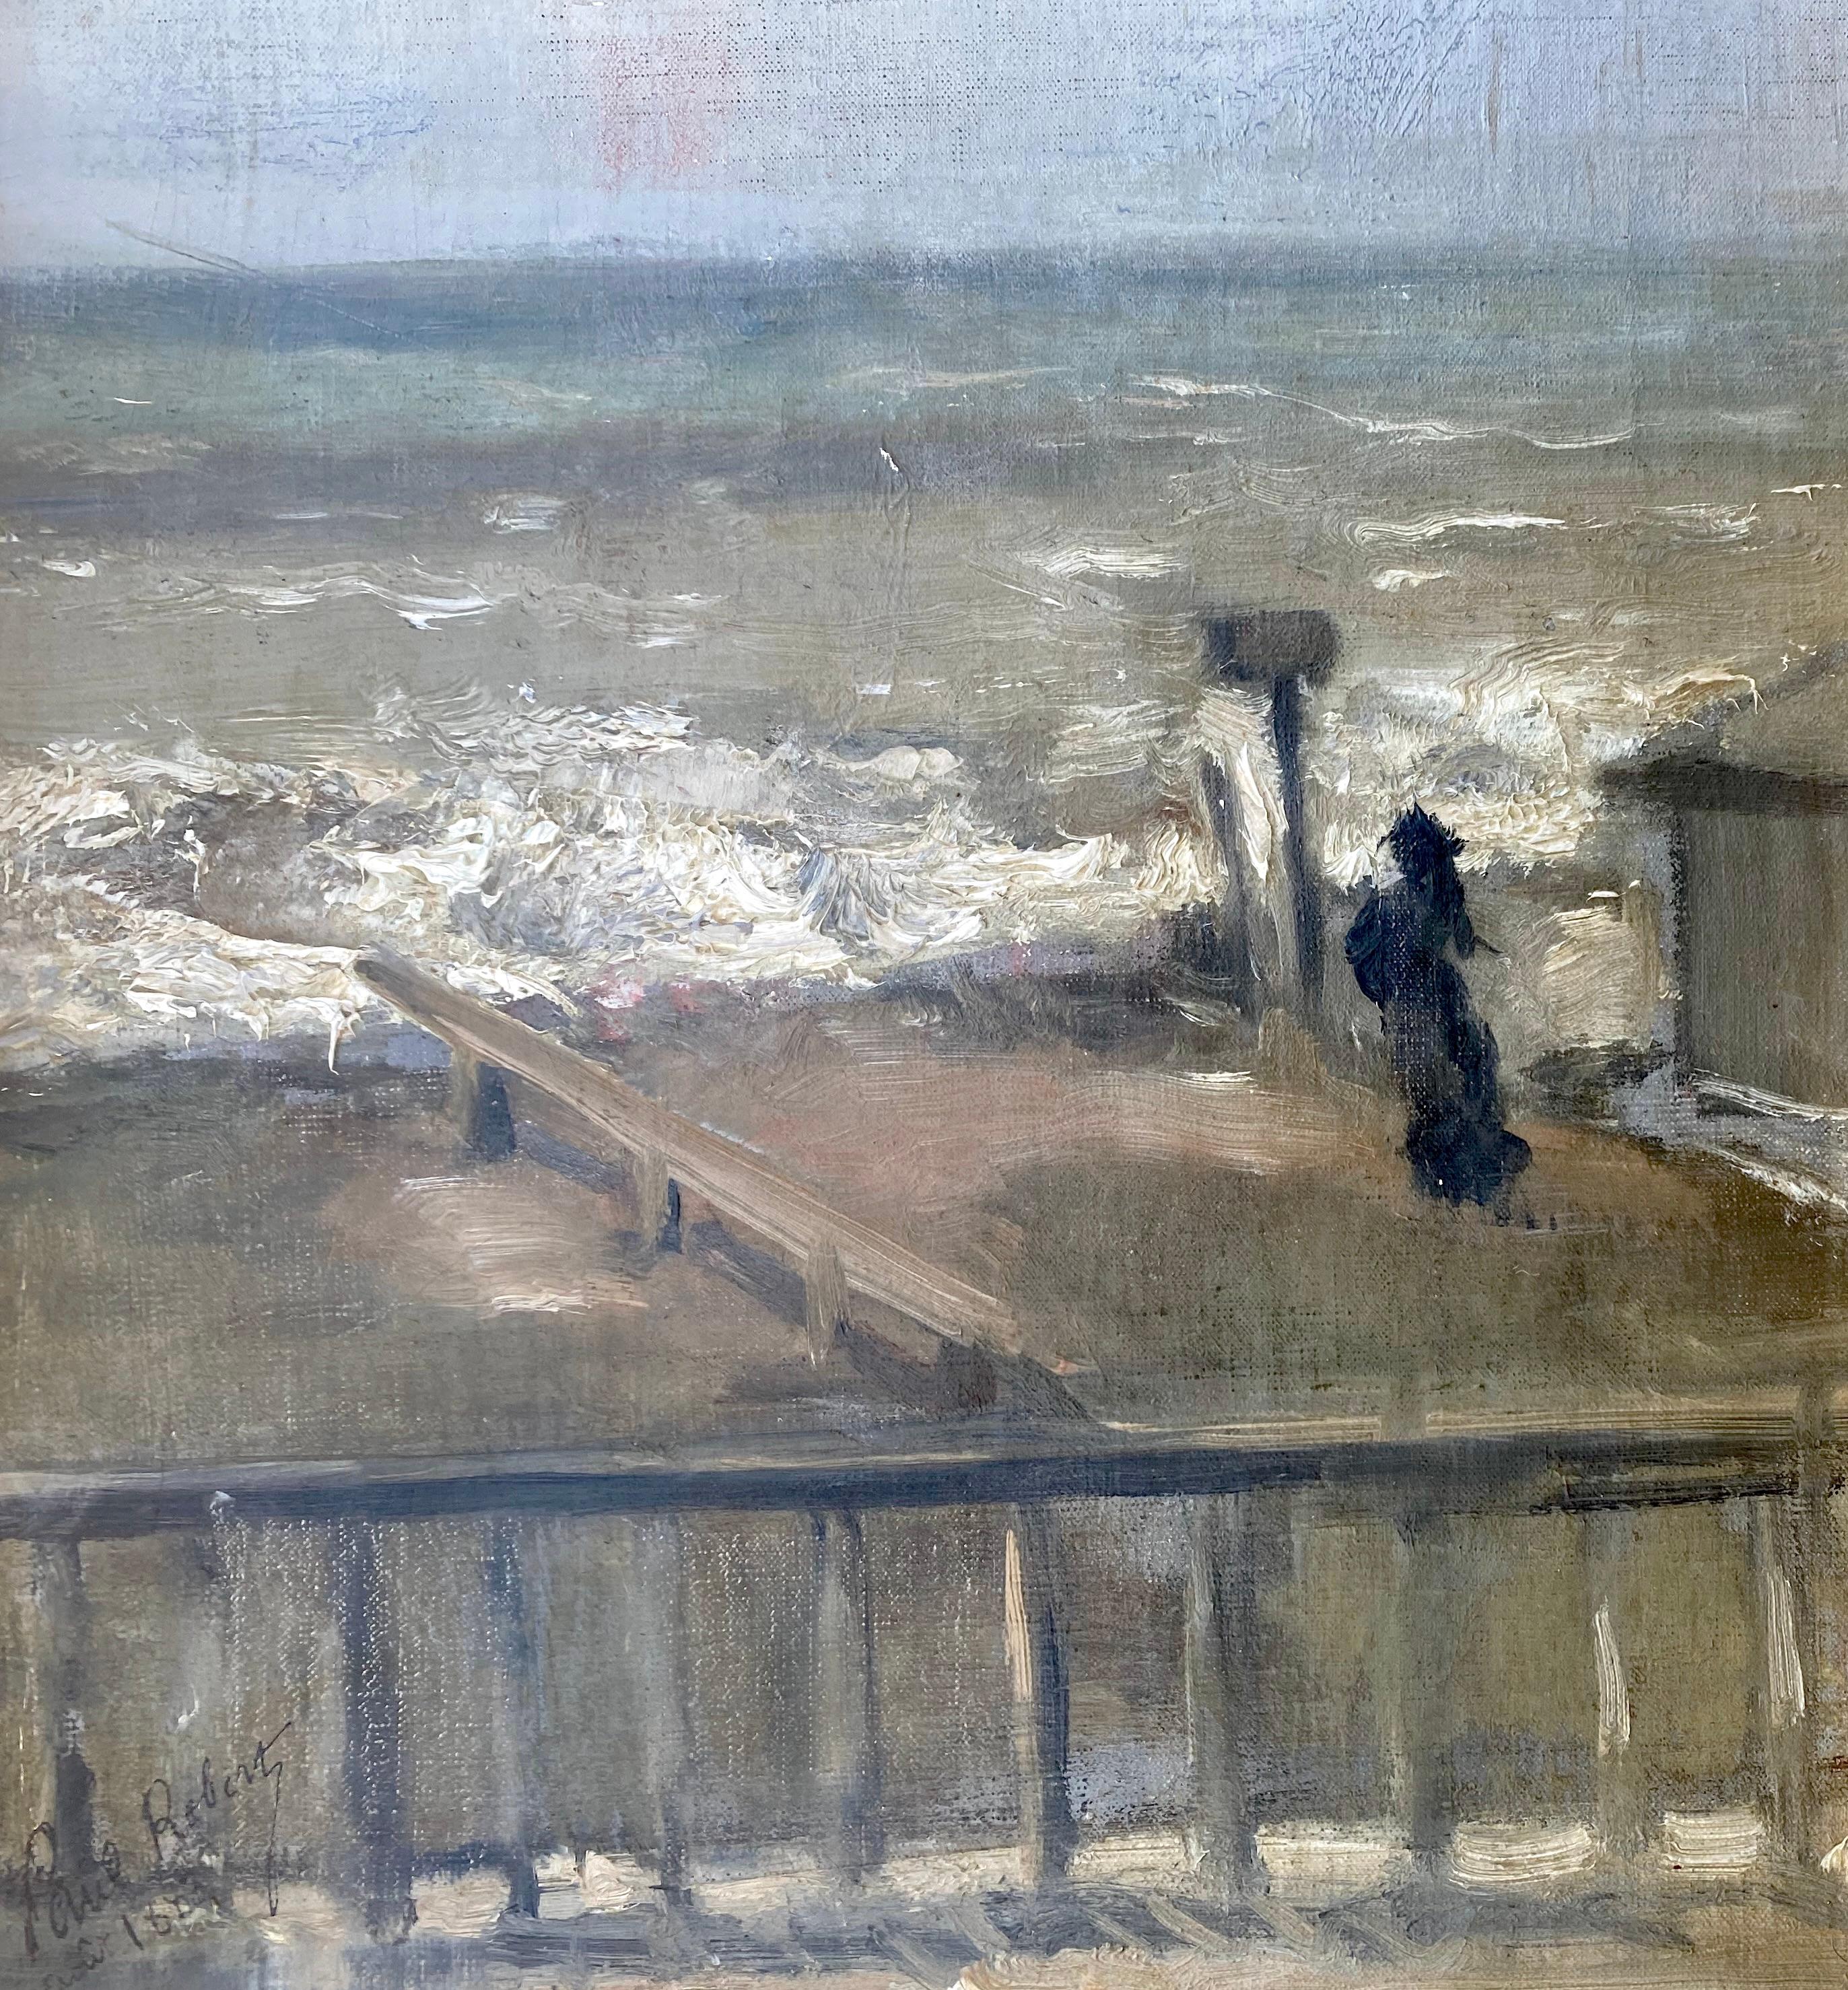 The Woman on the Beach: coastal scene by friend of Degas: gray green blue ocean  - Impressionist Painting by Paul Robert 